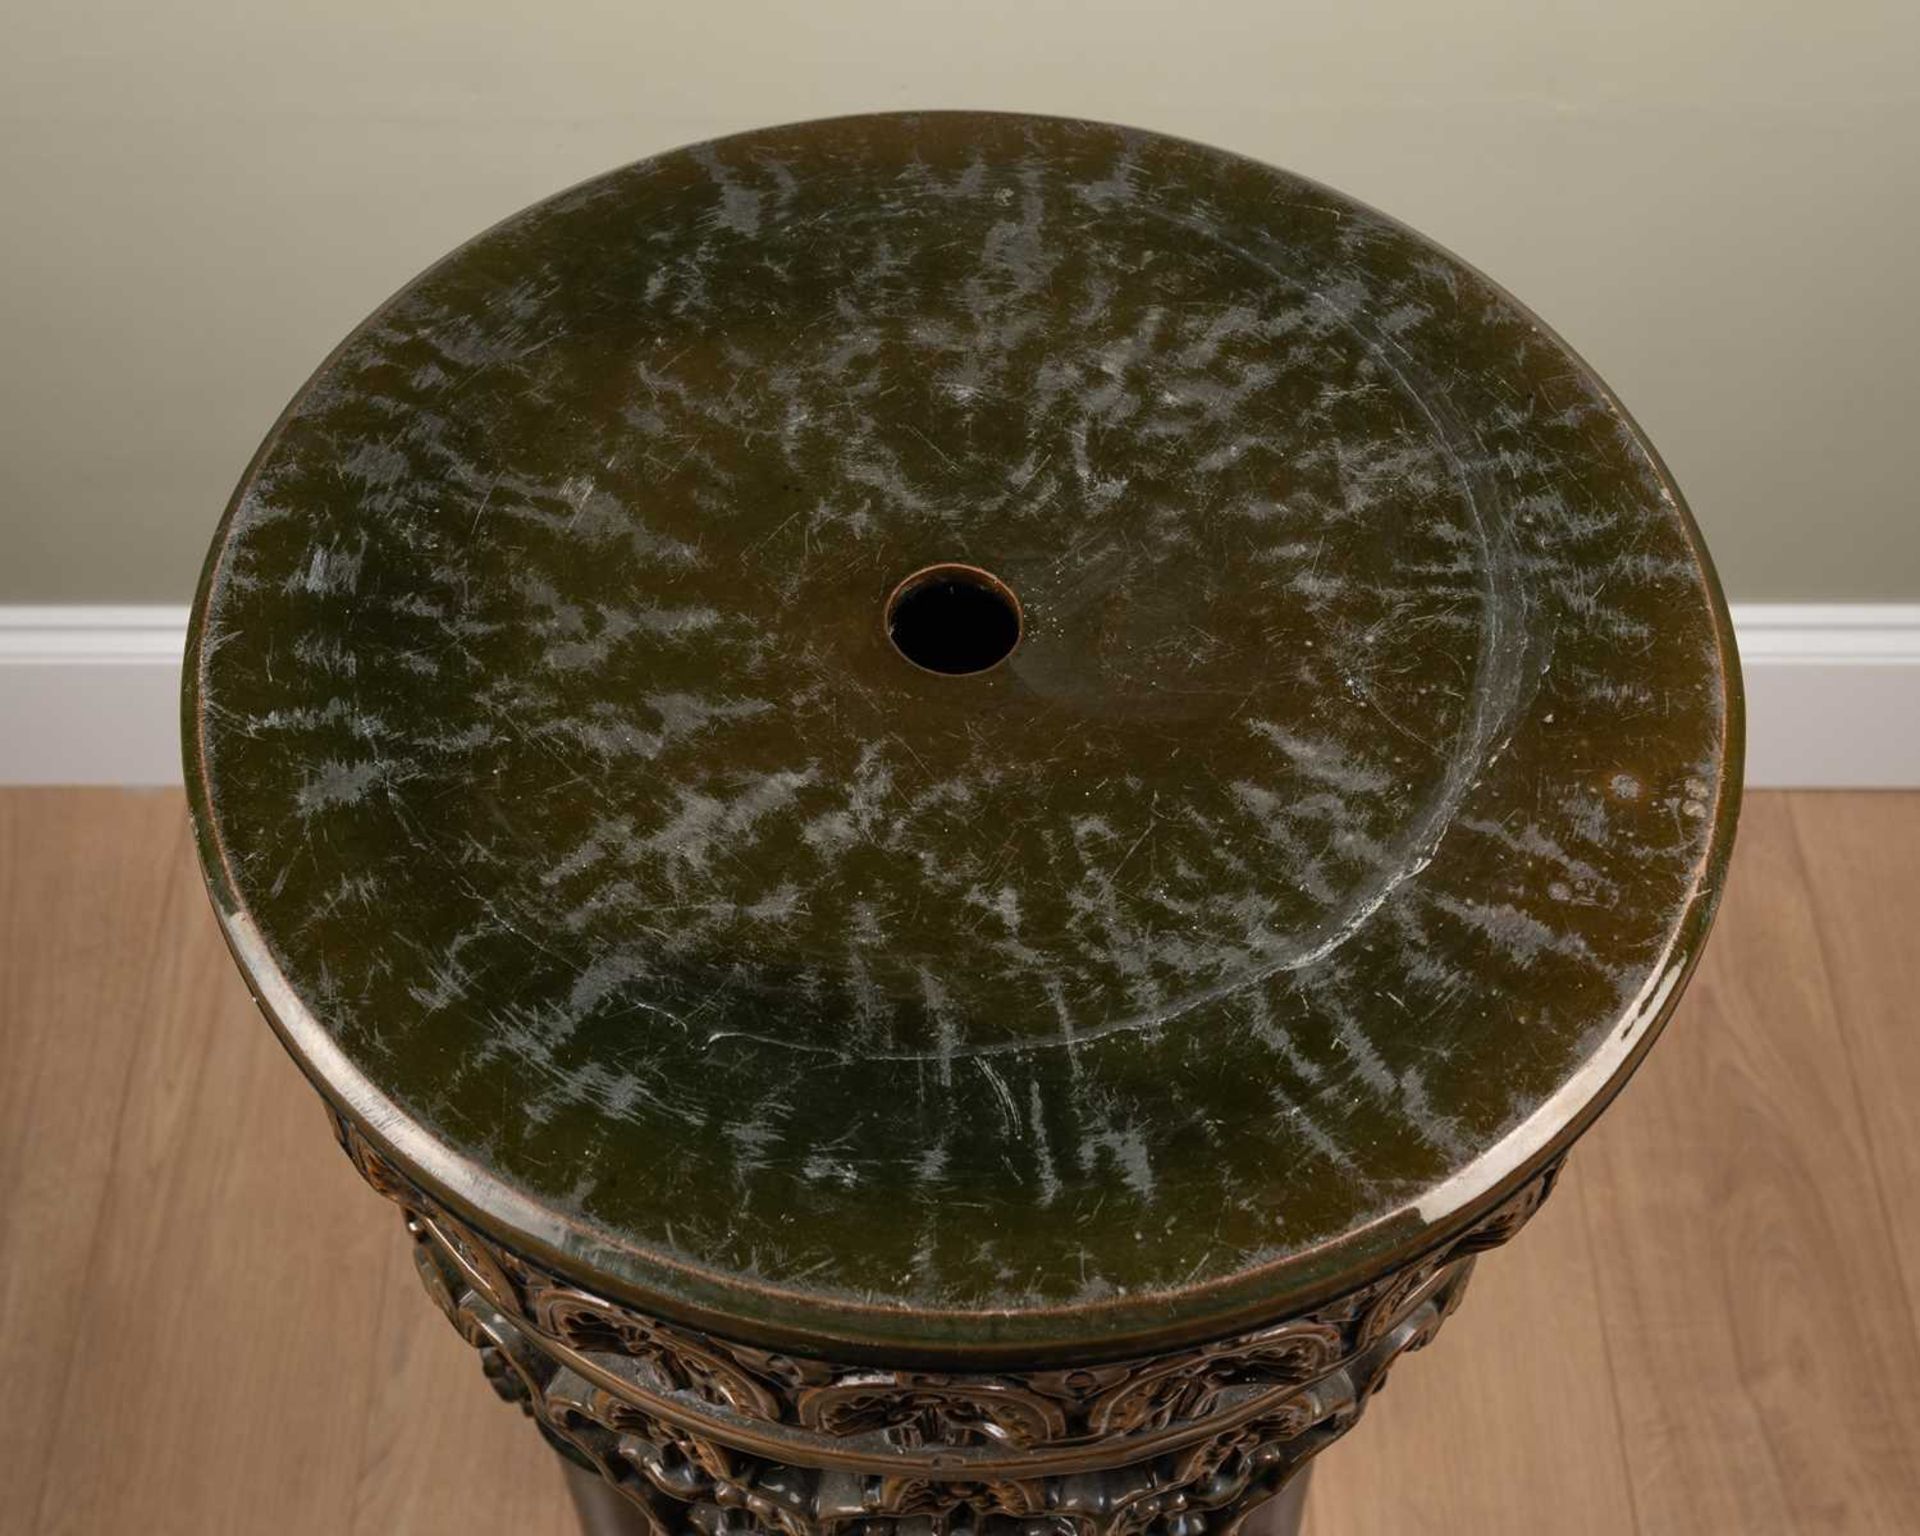 A Clement Massier (1844-1917) Alhambra jardiniere stand in green glazed terracotta, 42.5cm diameter, - Image 5 of 6